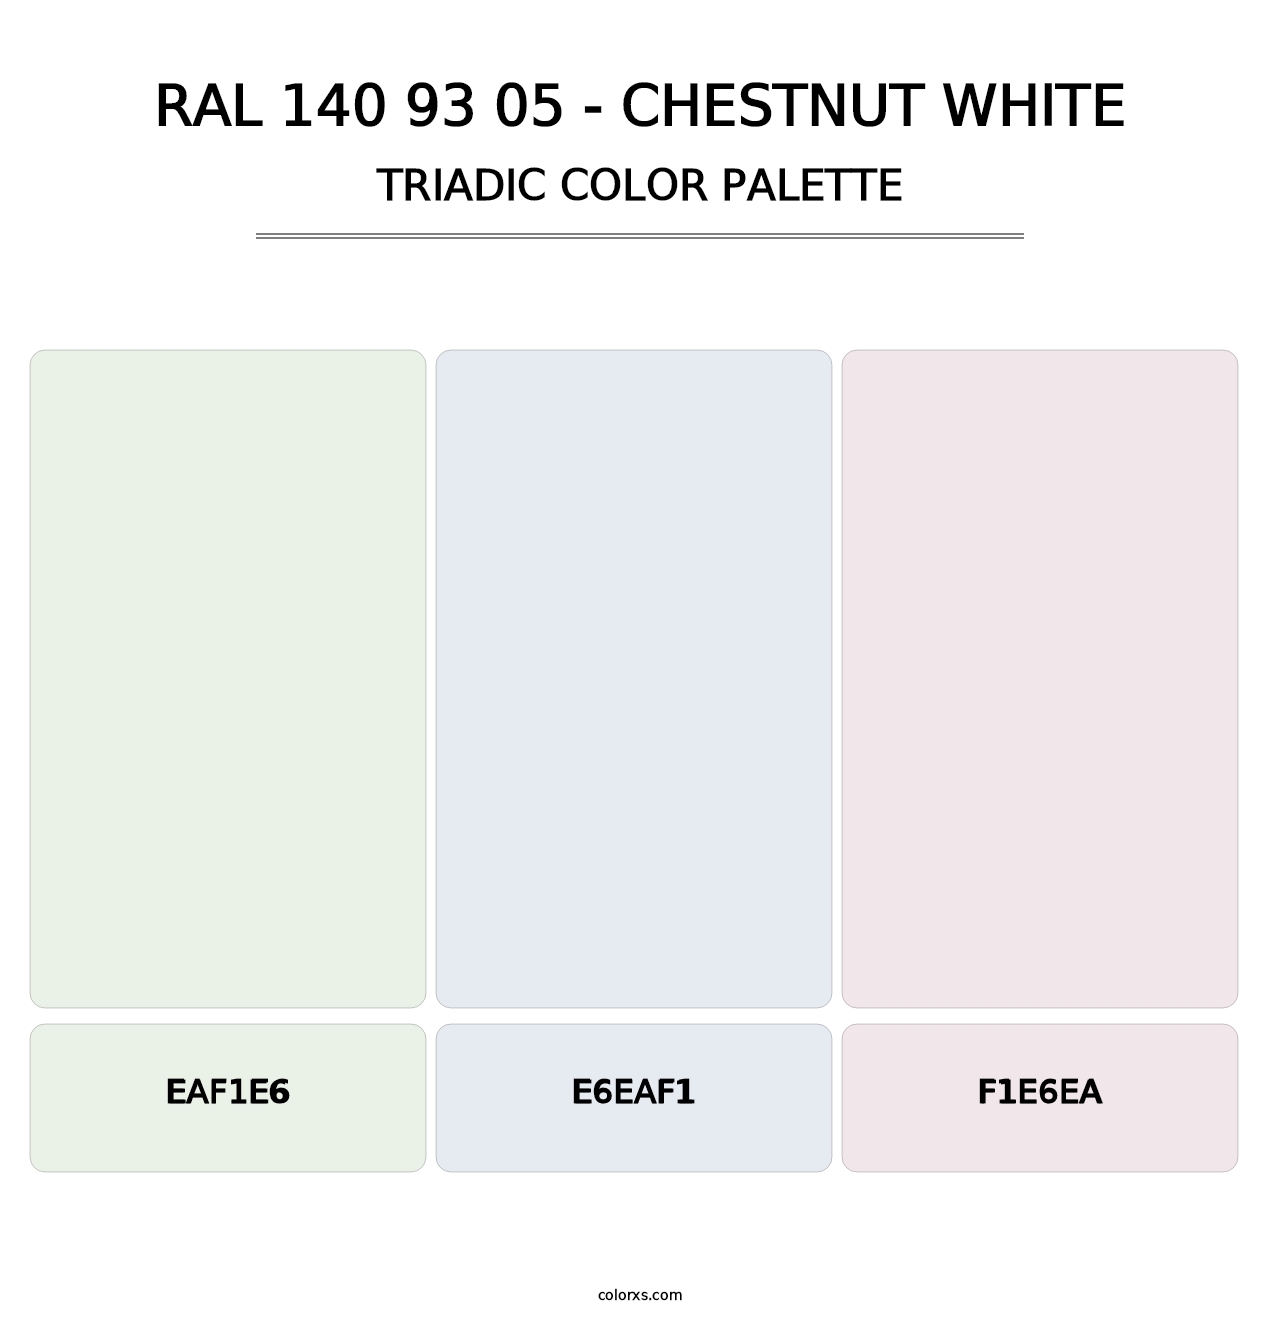 RAL 140 93 05 - Chestnut White - Triadic Color Palette